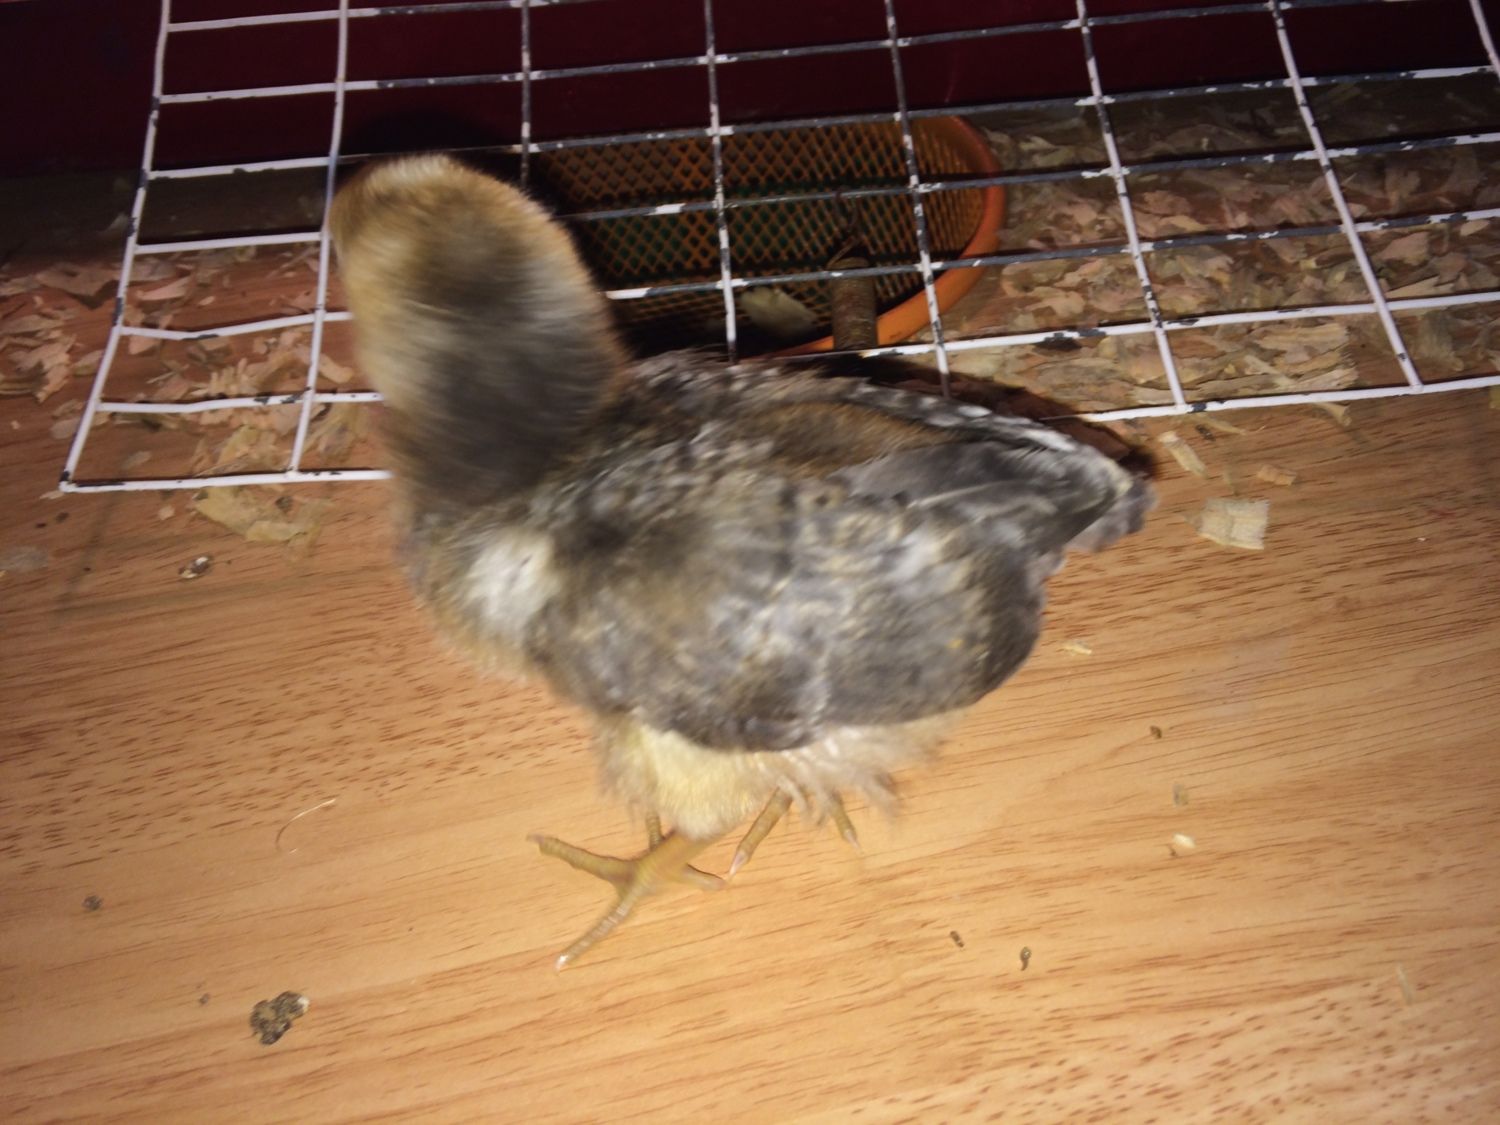 Any Chicks You're Raising At The Moment! | Page 3 ...